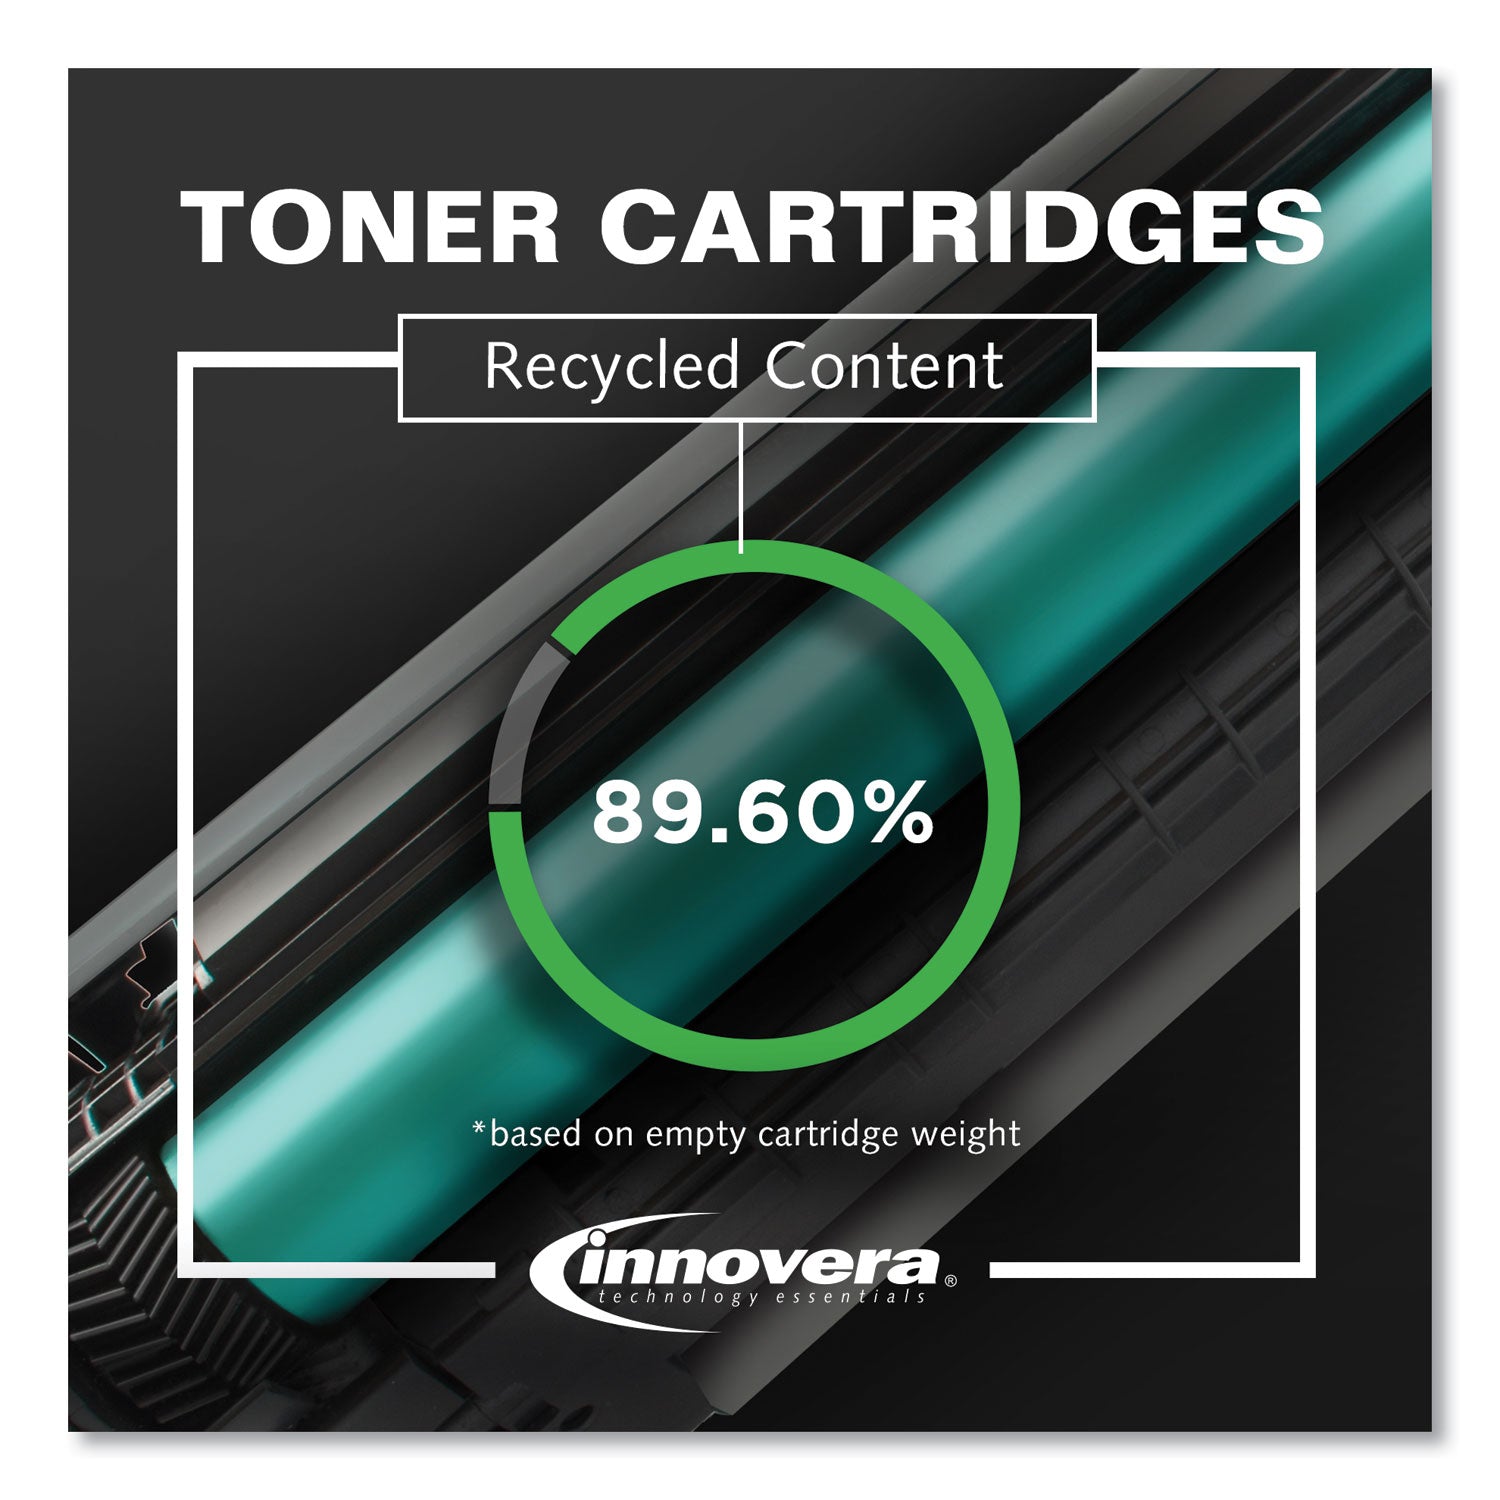 Remanufactured Black Toner, Replacement for 331-7335, 1,500 Page-Yield - 